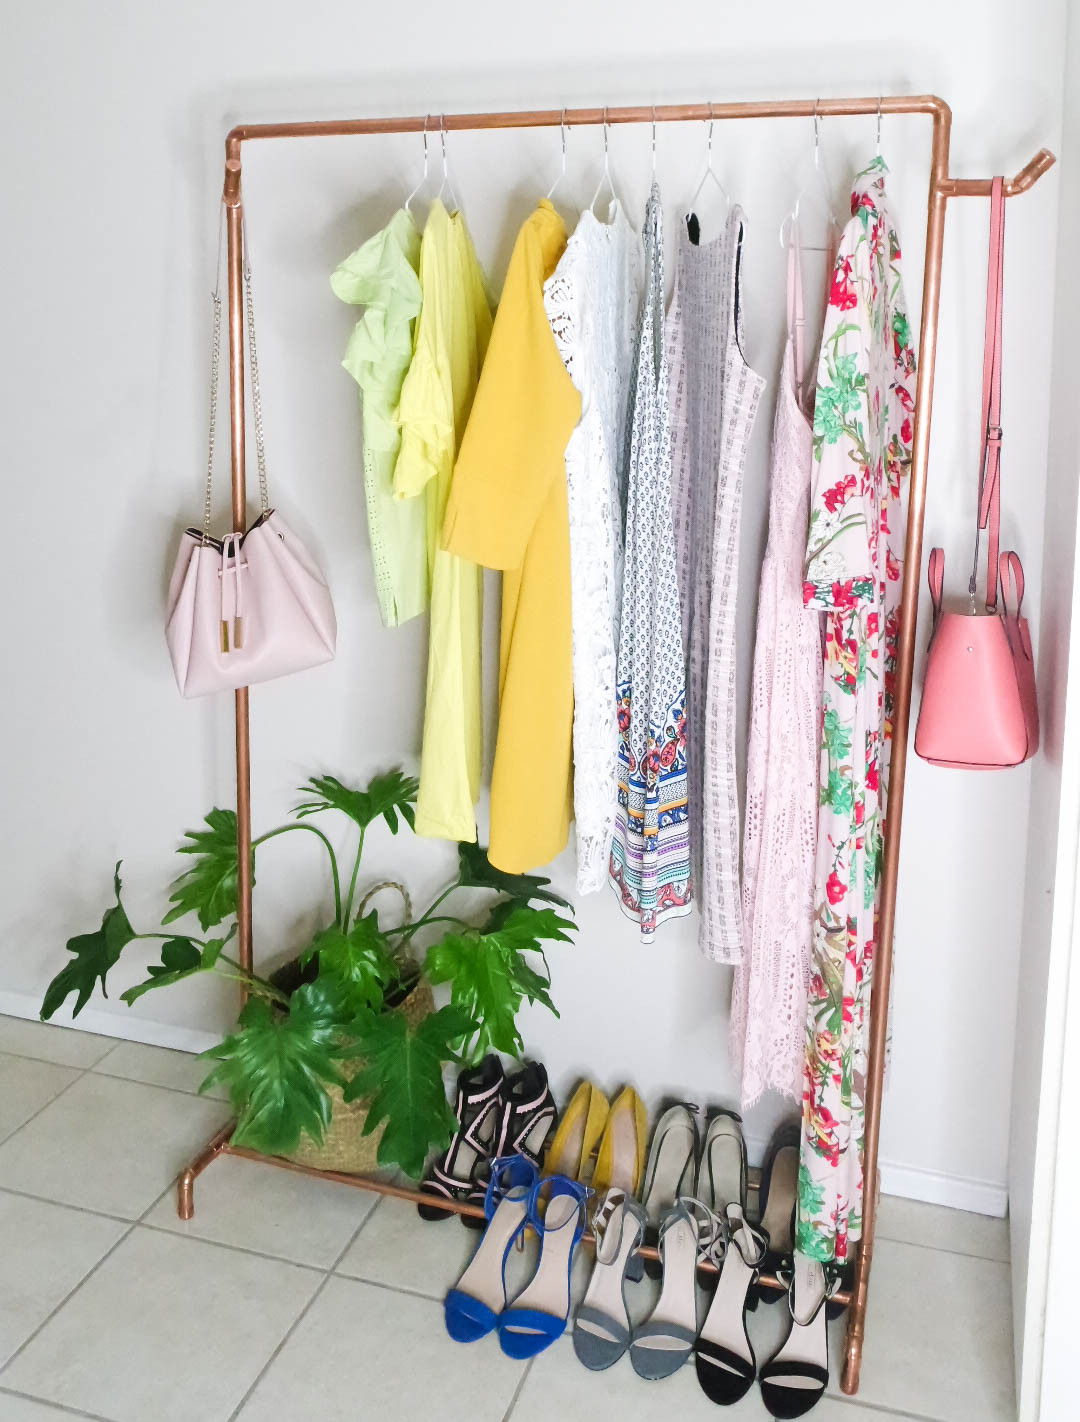 DIY Pipe Clothes Rack
 diy copper pipe clothing rack ByLungi